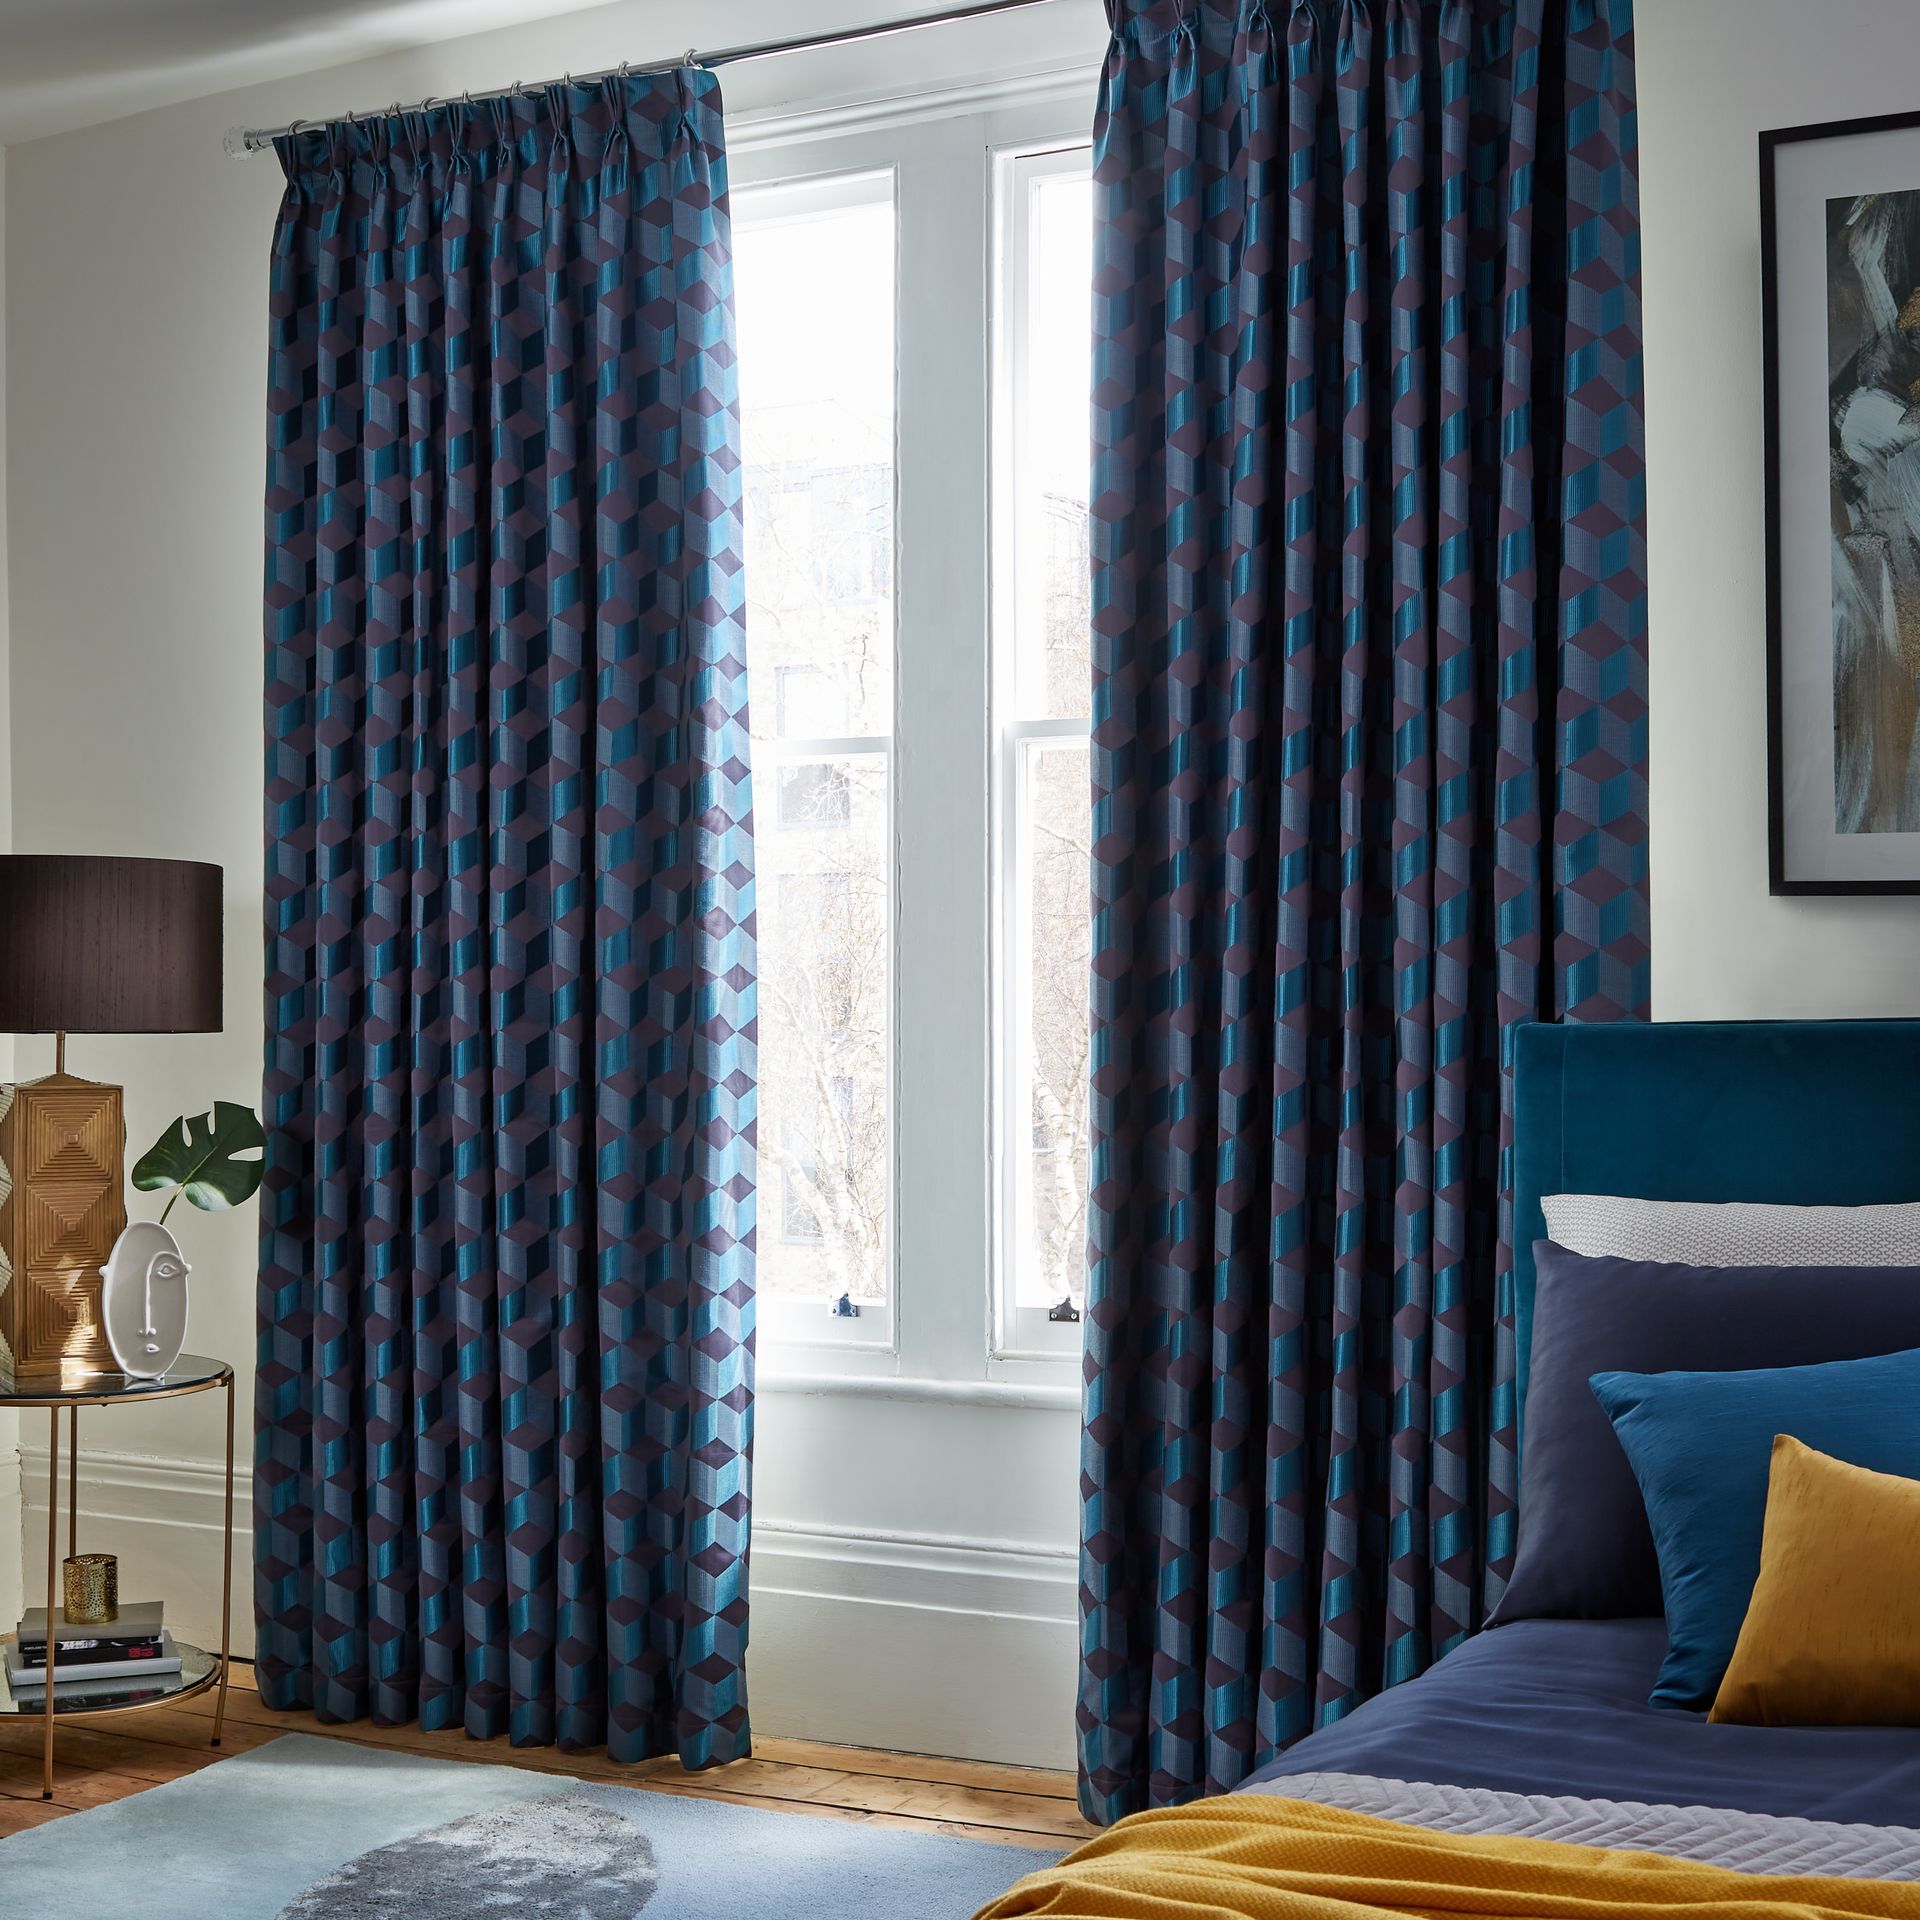 Bespoke fitted curtains